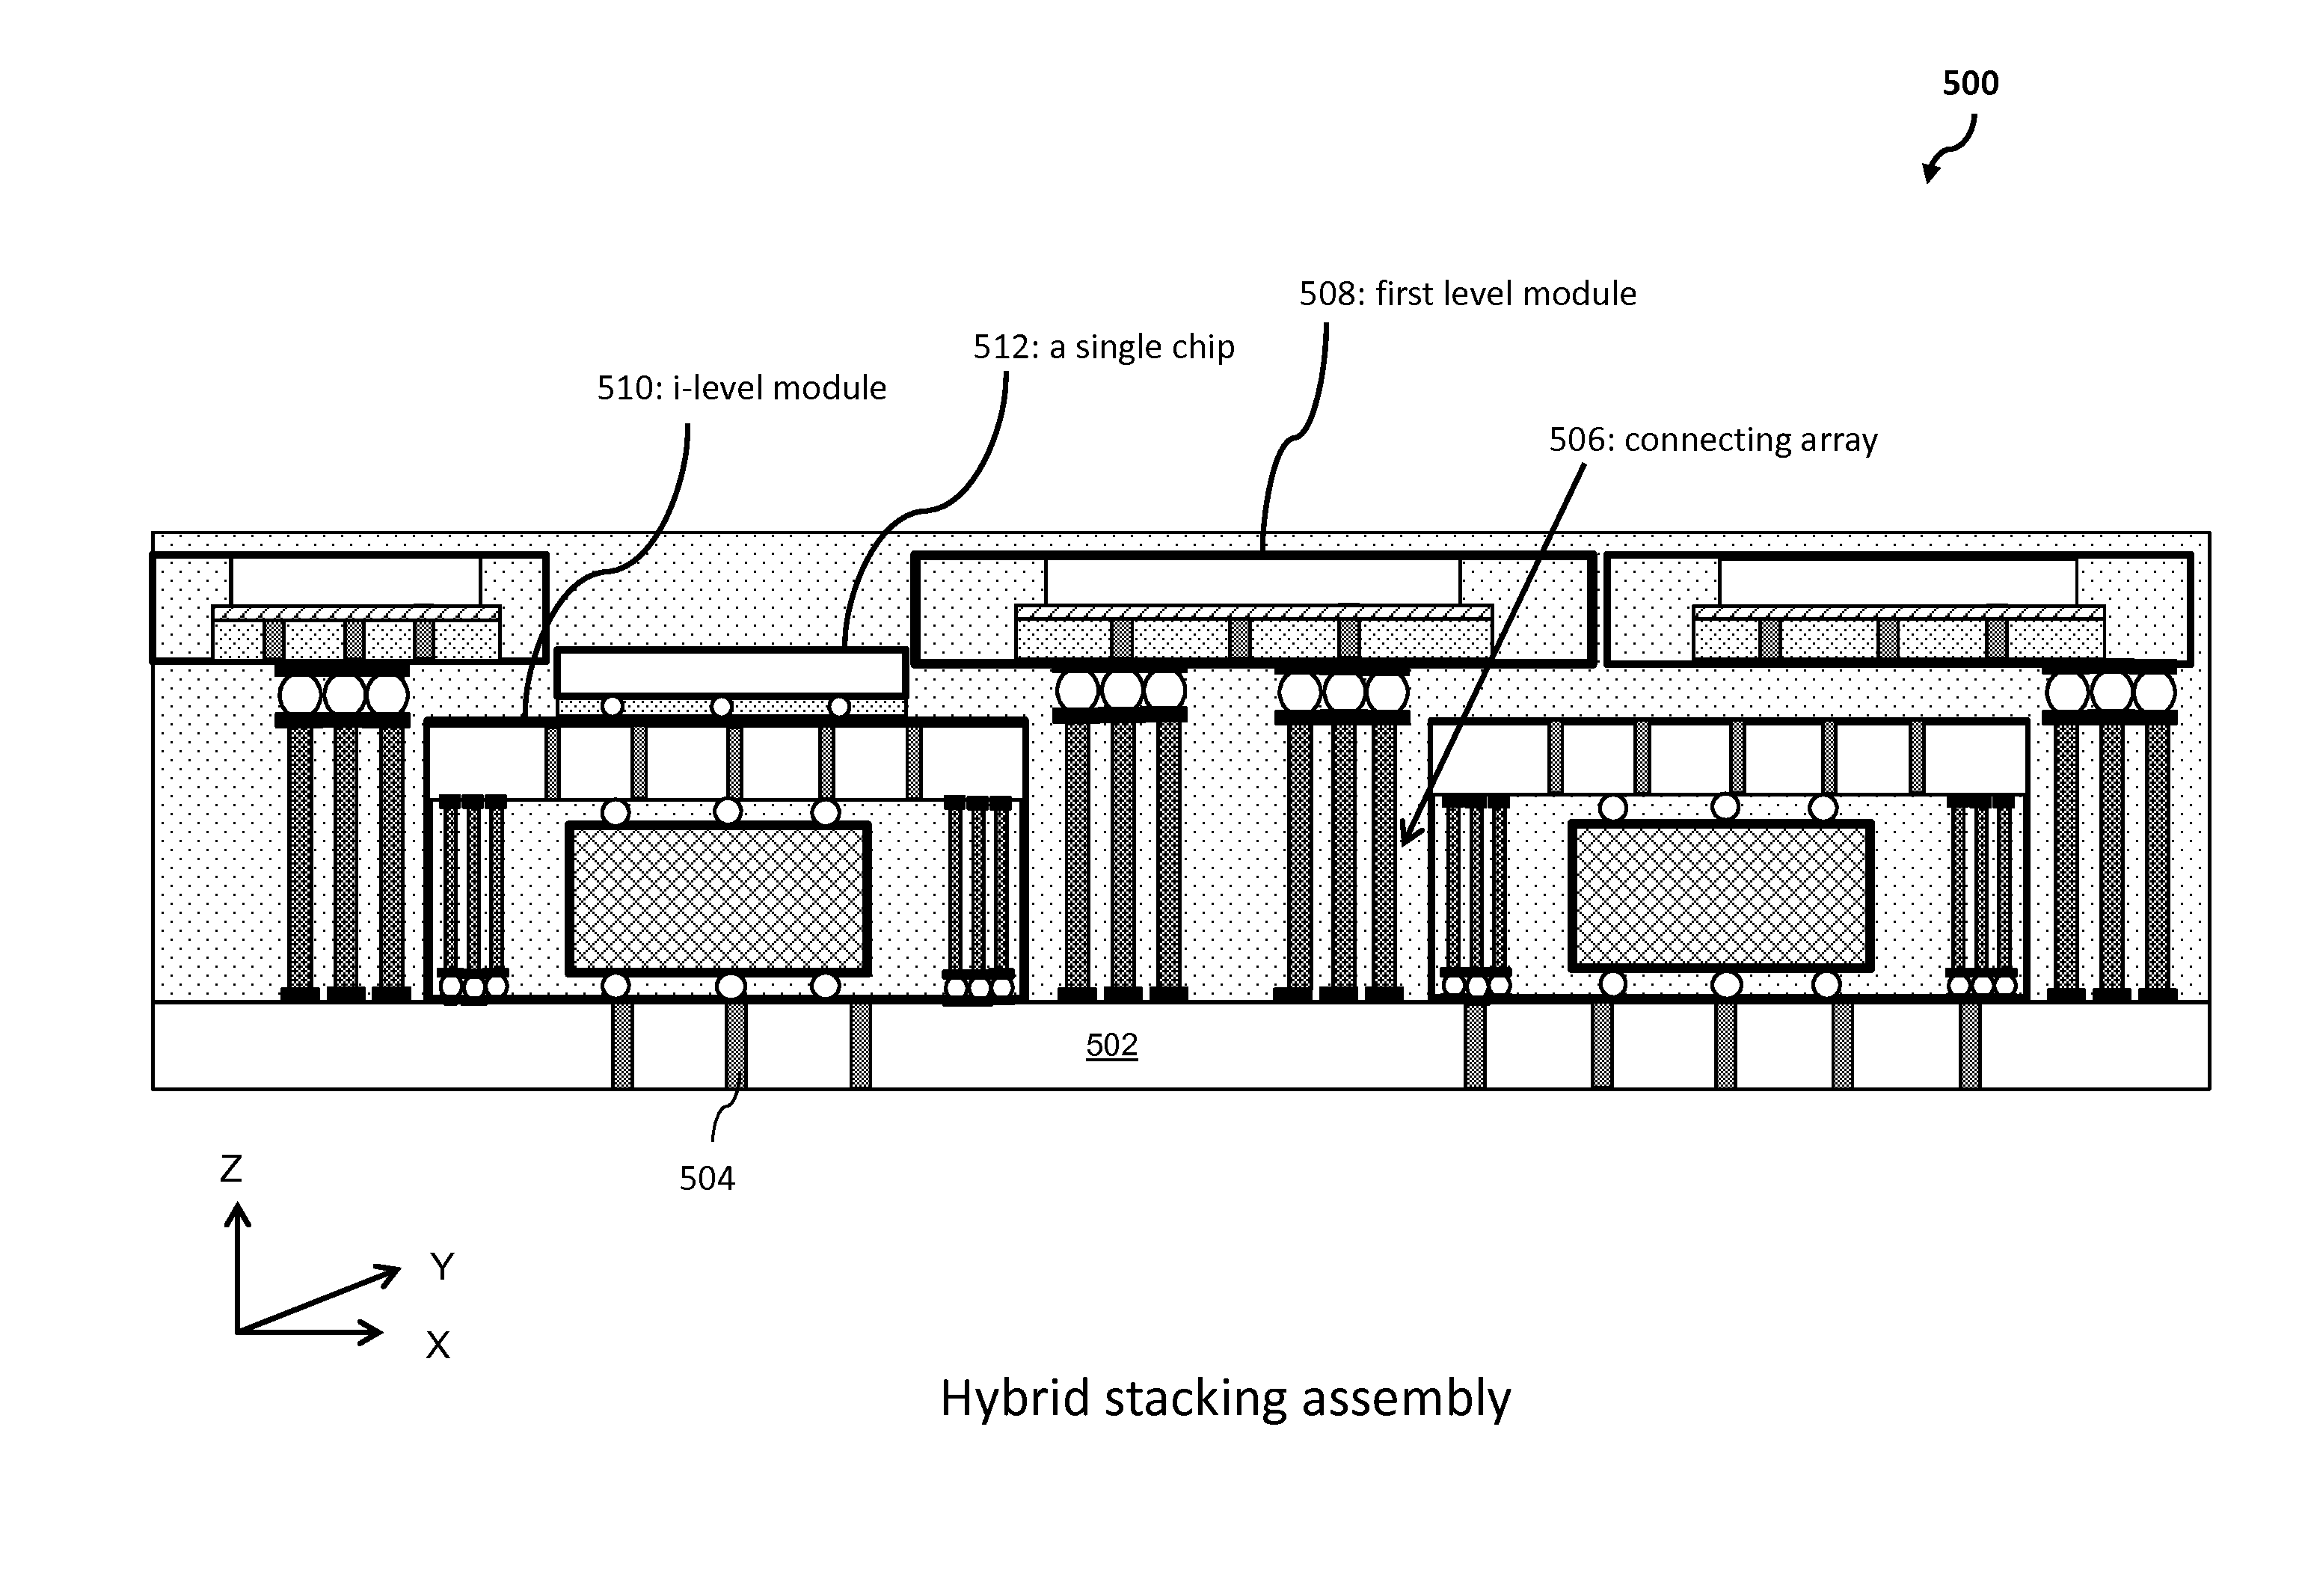 Structure and method for integrated circuits packaging with increased density